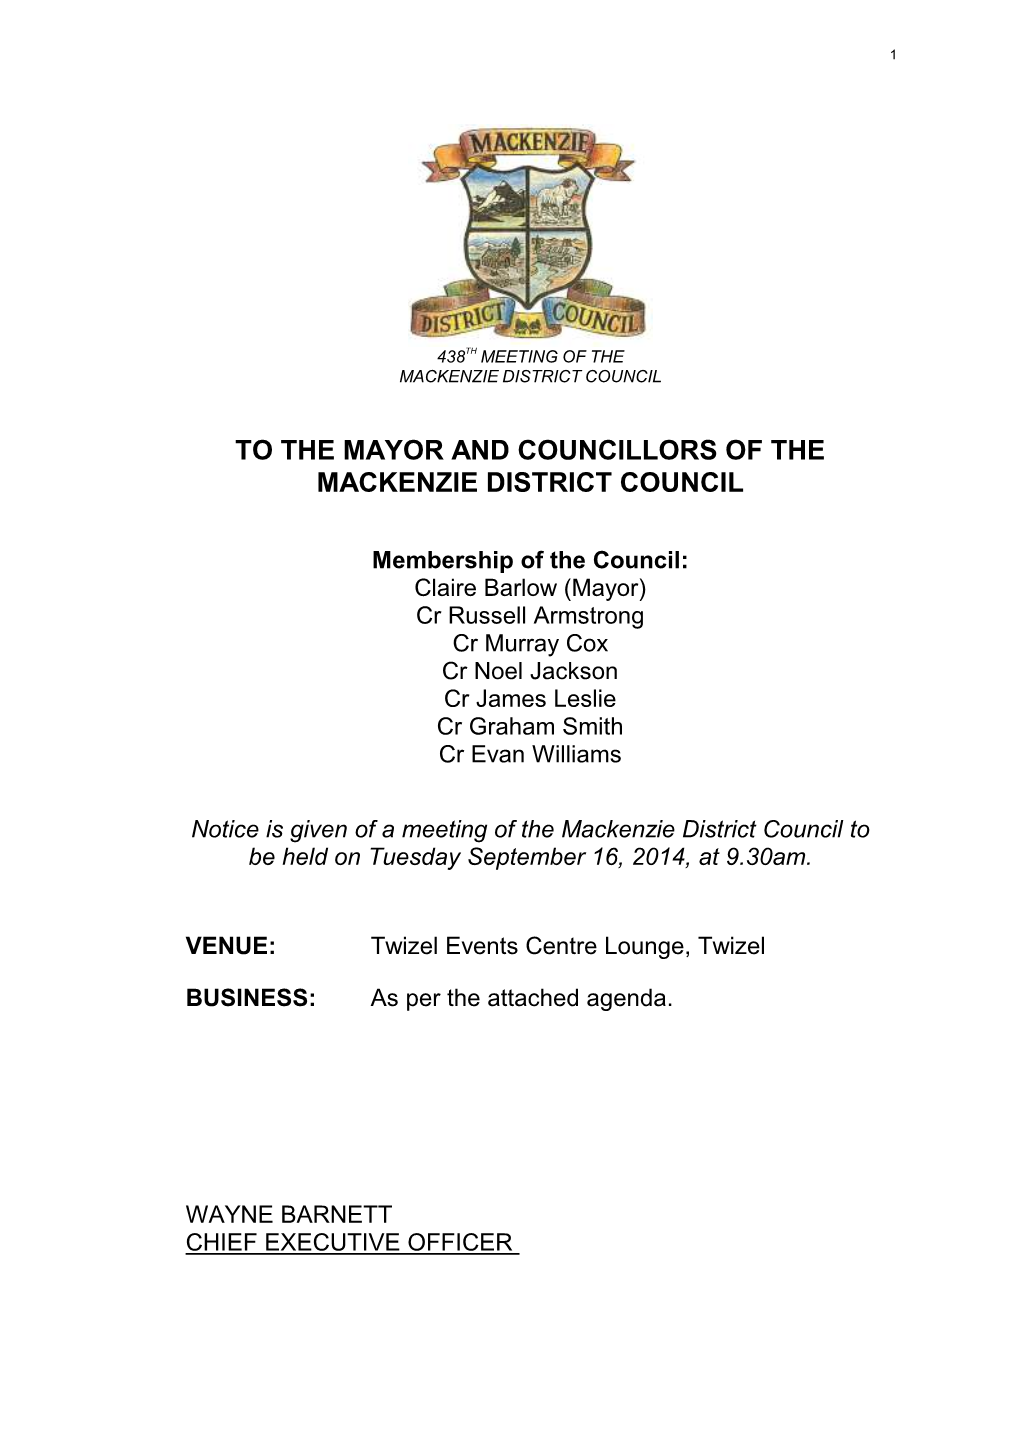 To the Mayor and Councillors of the Mackenzie District Council